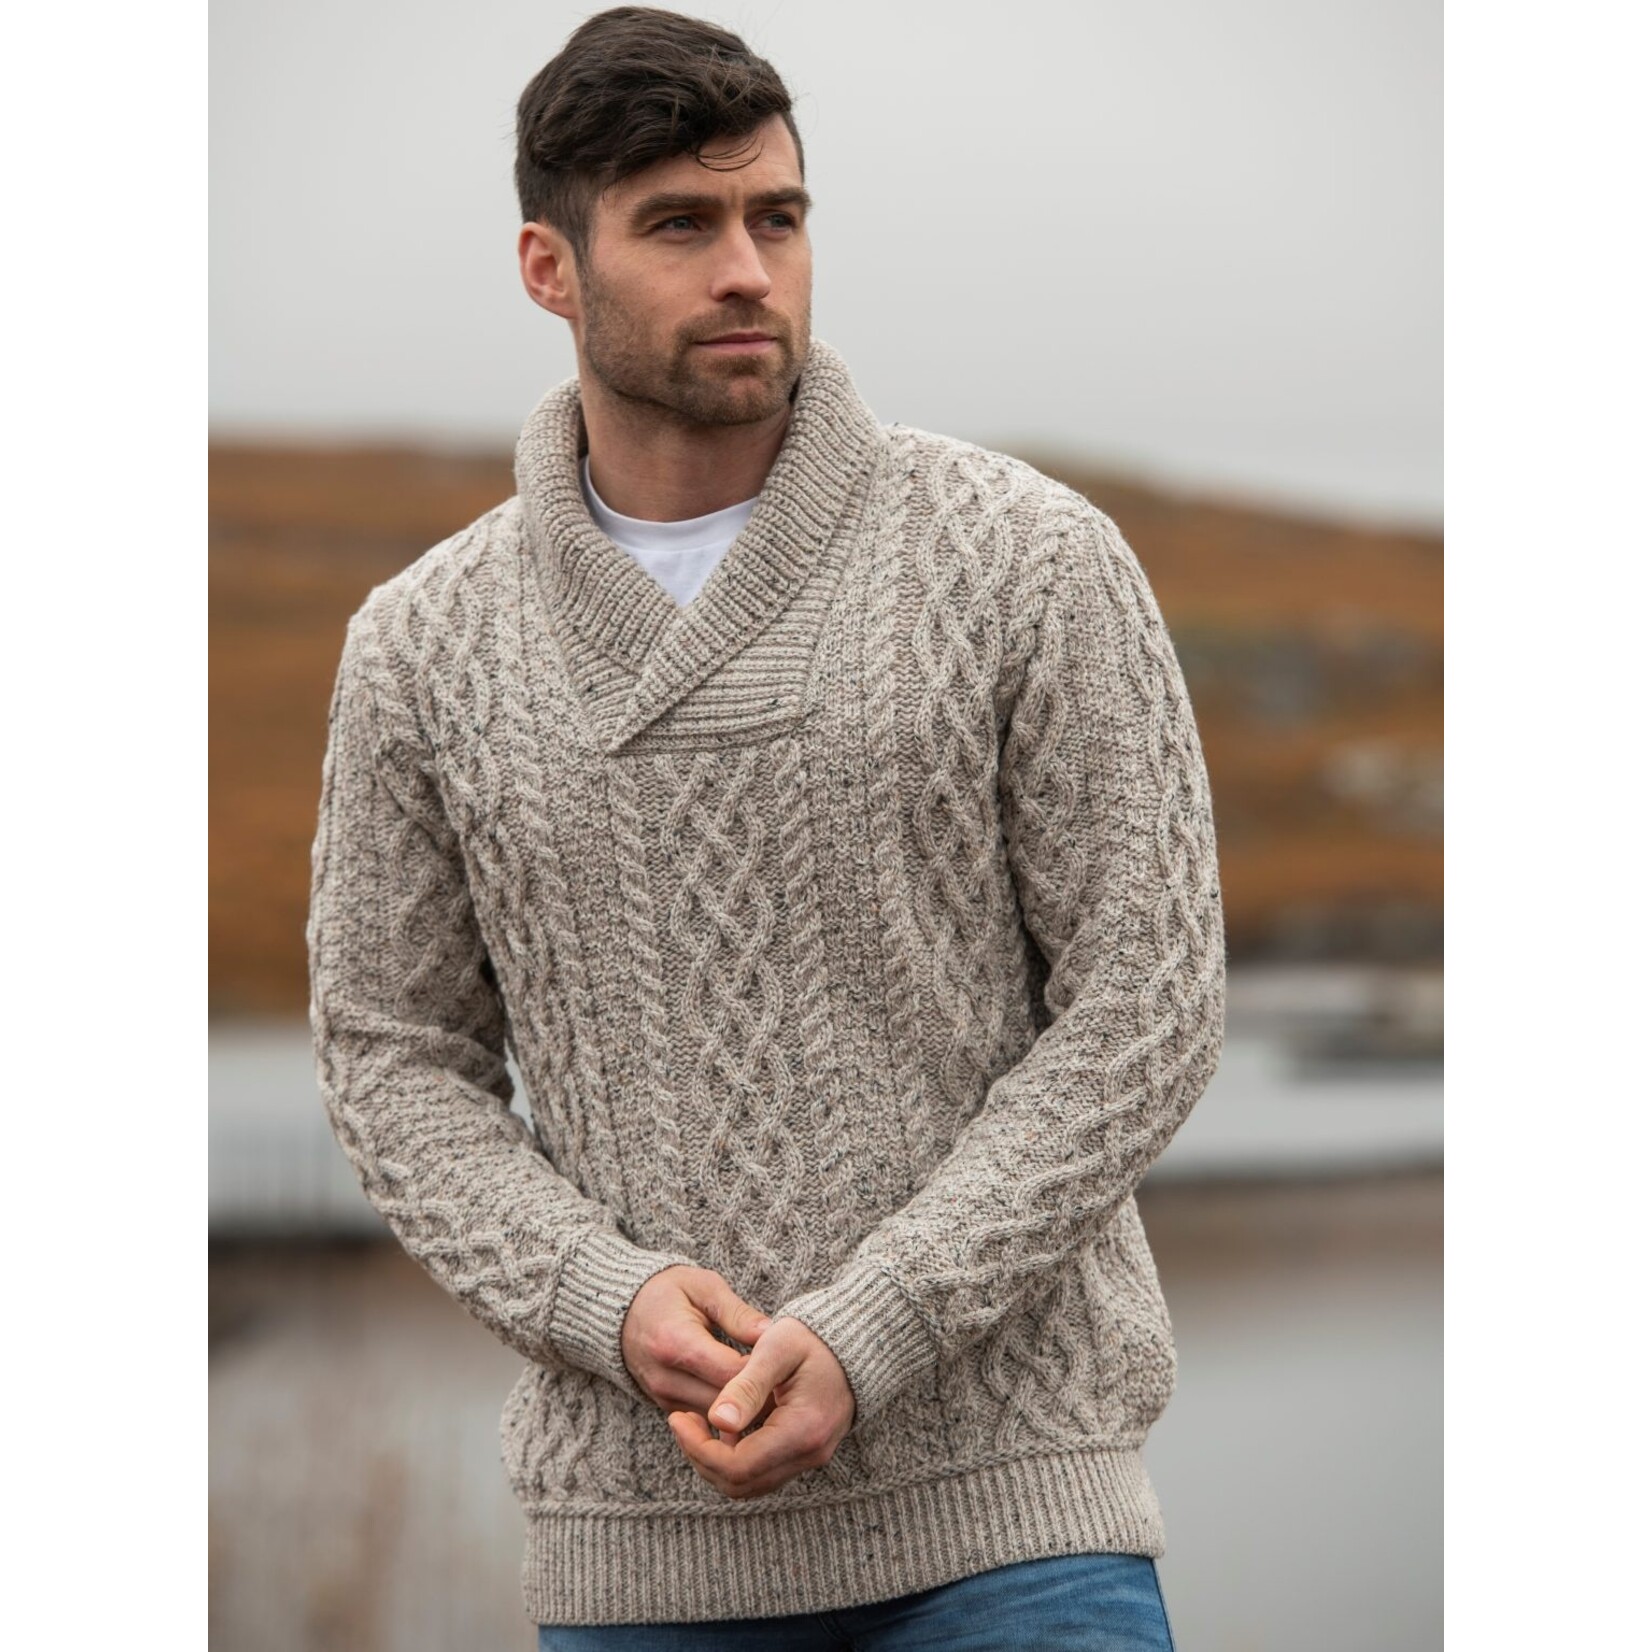 West End Knitwear Bunratty Sweater